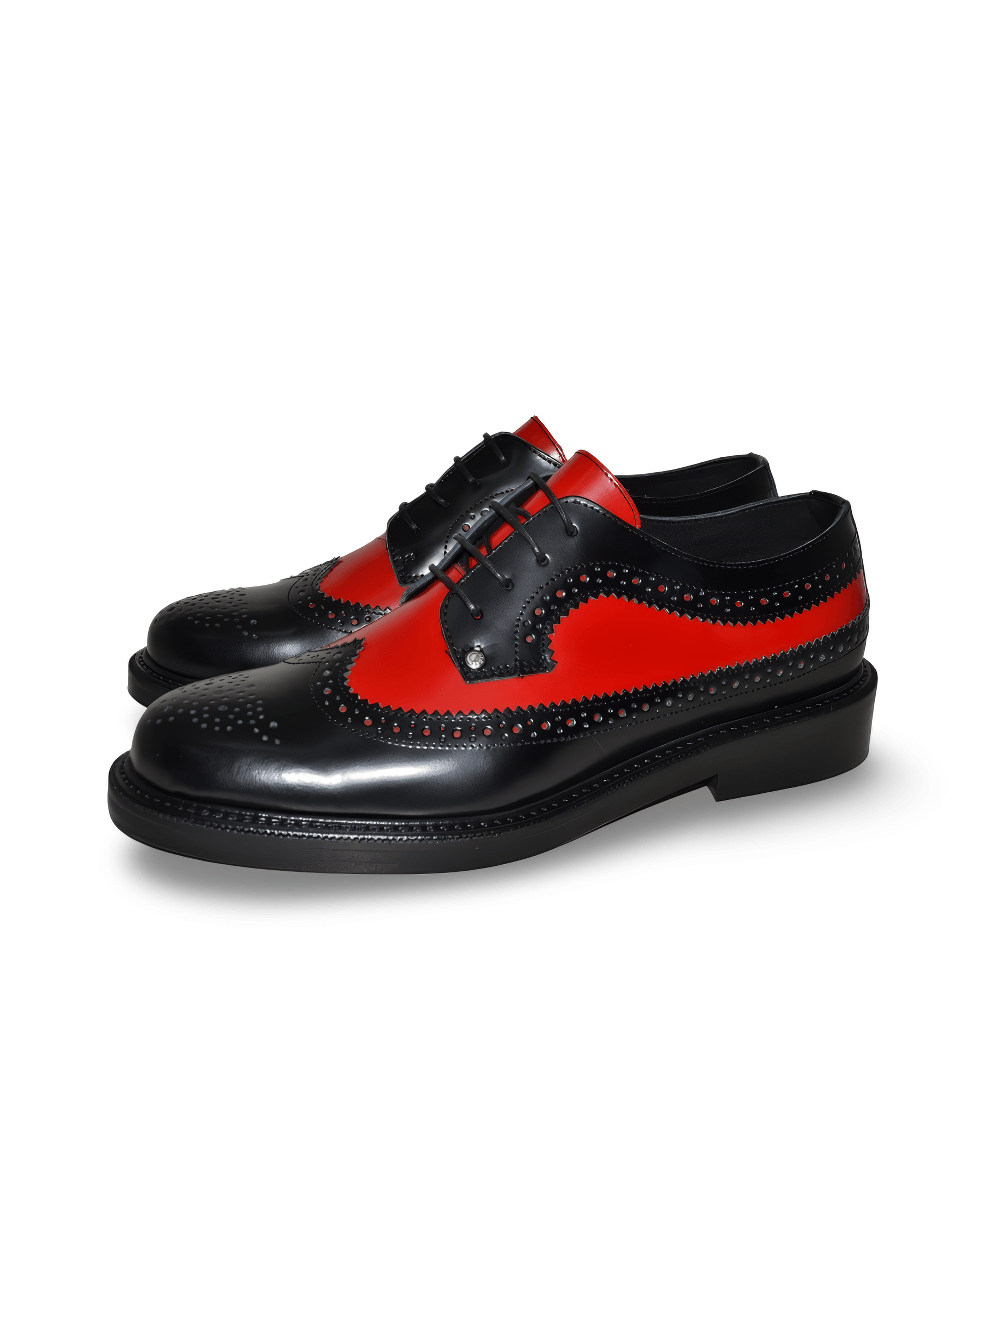 Rockabilly Style Black and Red Lace-Up Derby Shoes for Men